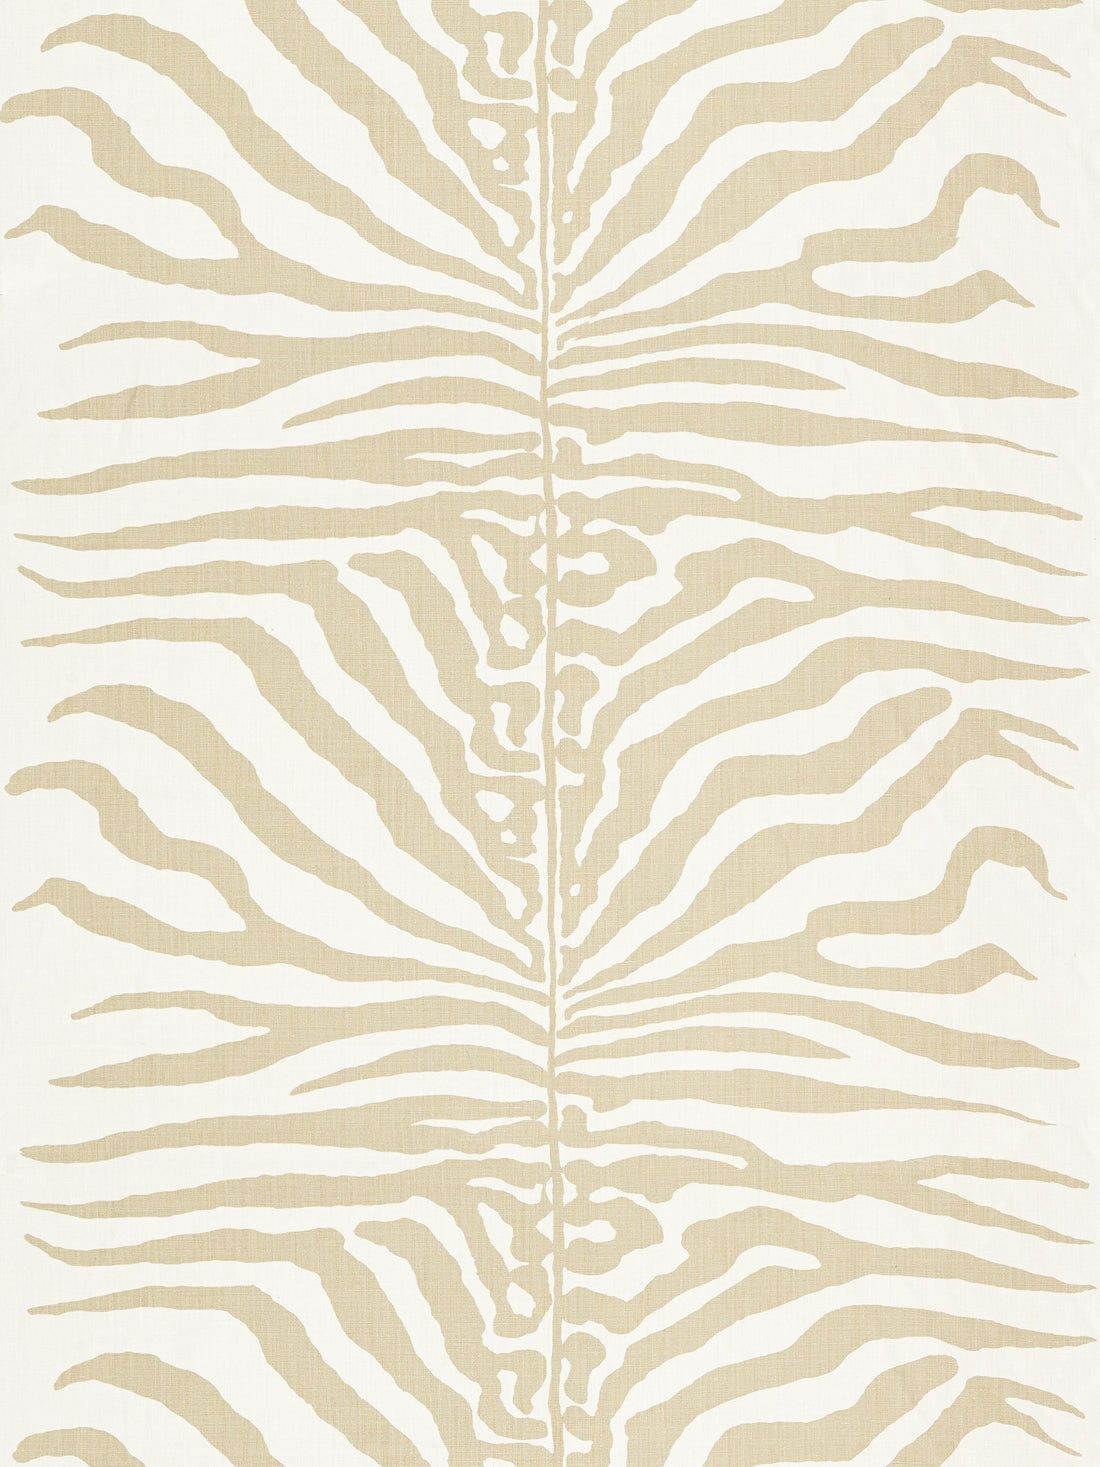 Zebra fabric in sahara color - pattern number SC 000216366M - by Scalamandre in the Scalamandre Fabrics Book 1 collection